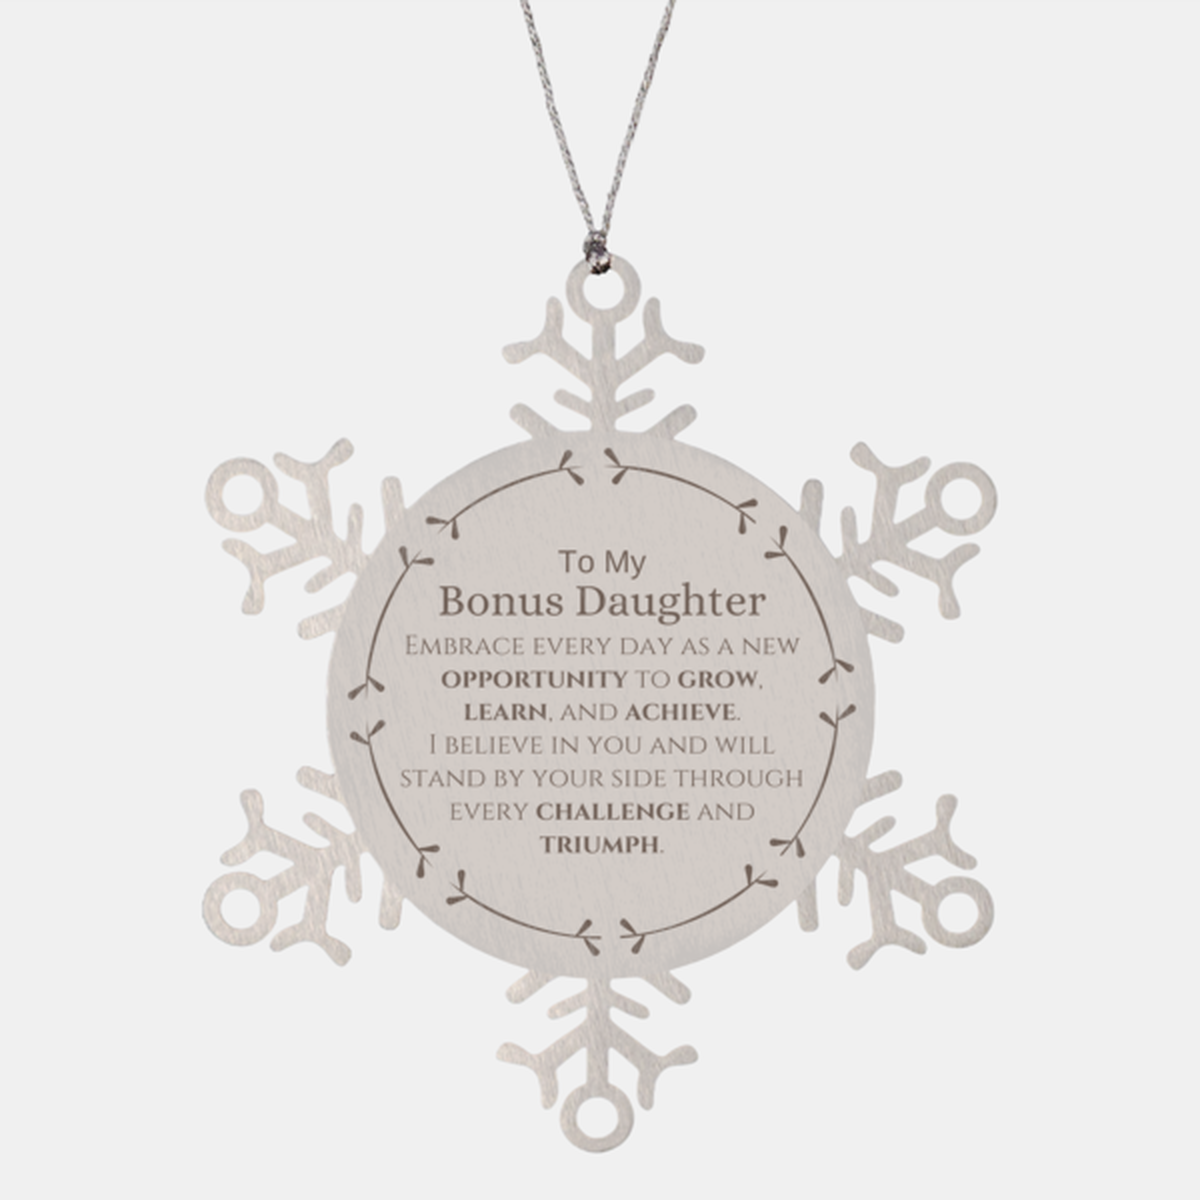 To My Bonus Daughter Gifts, I believe in you and will stand by your side, Inspirational Snowflake Ornament For Bonus Daughter, Birthday Christmas Motivational Bonus Daughter Gifts